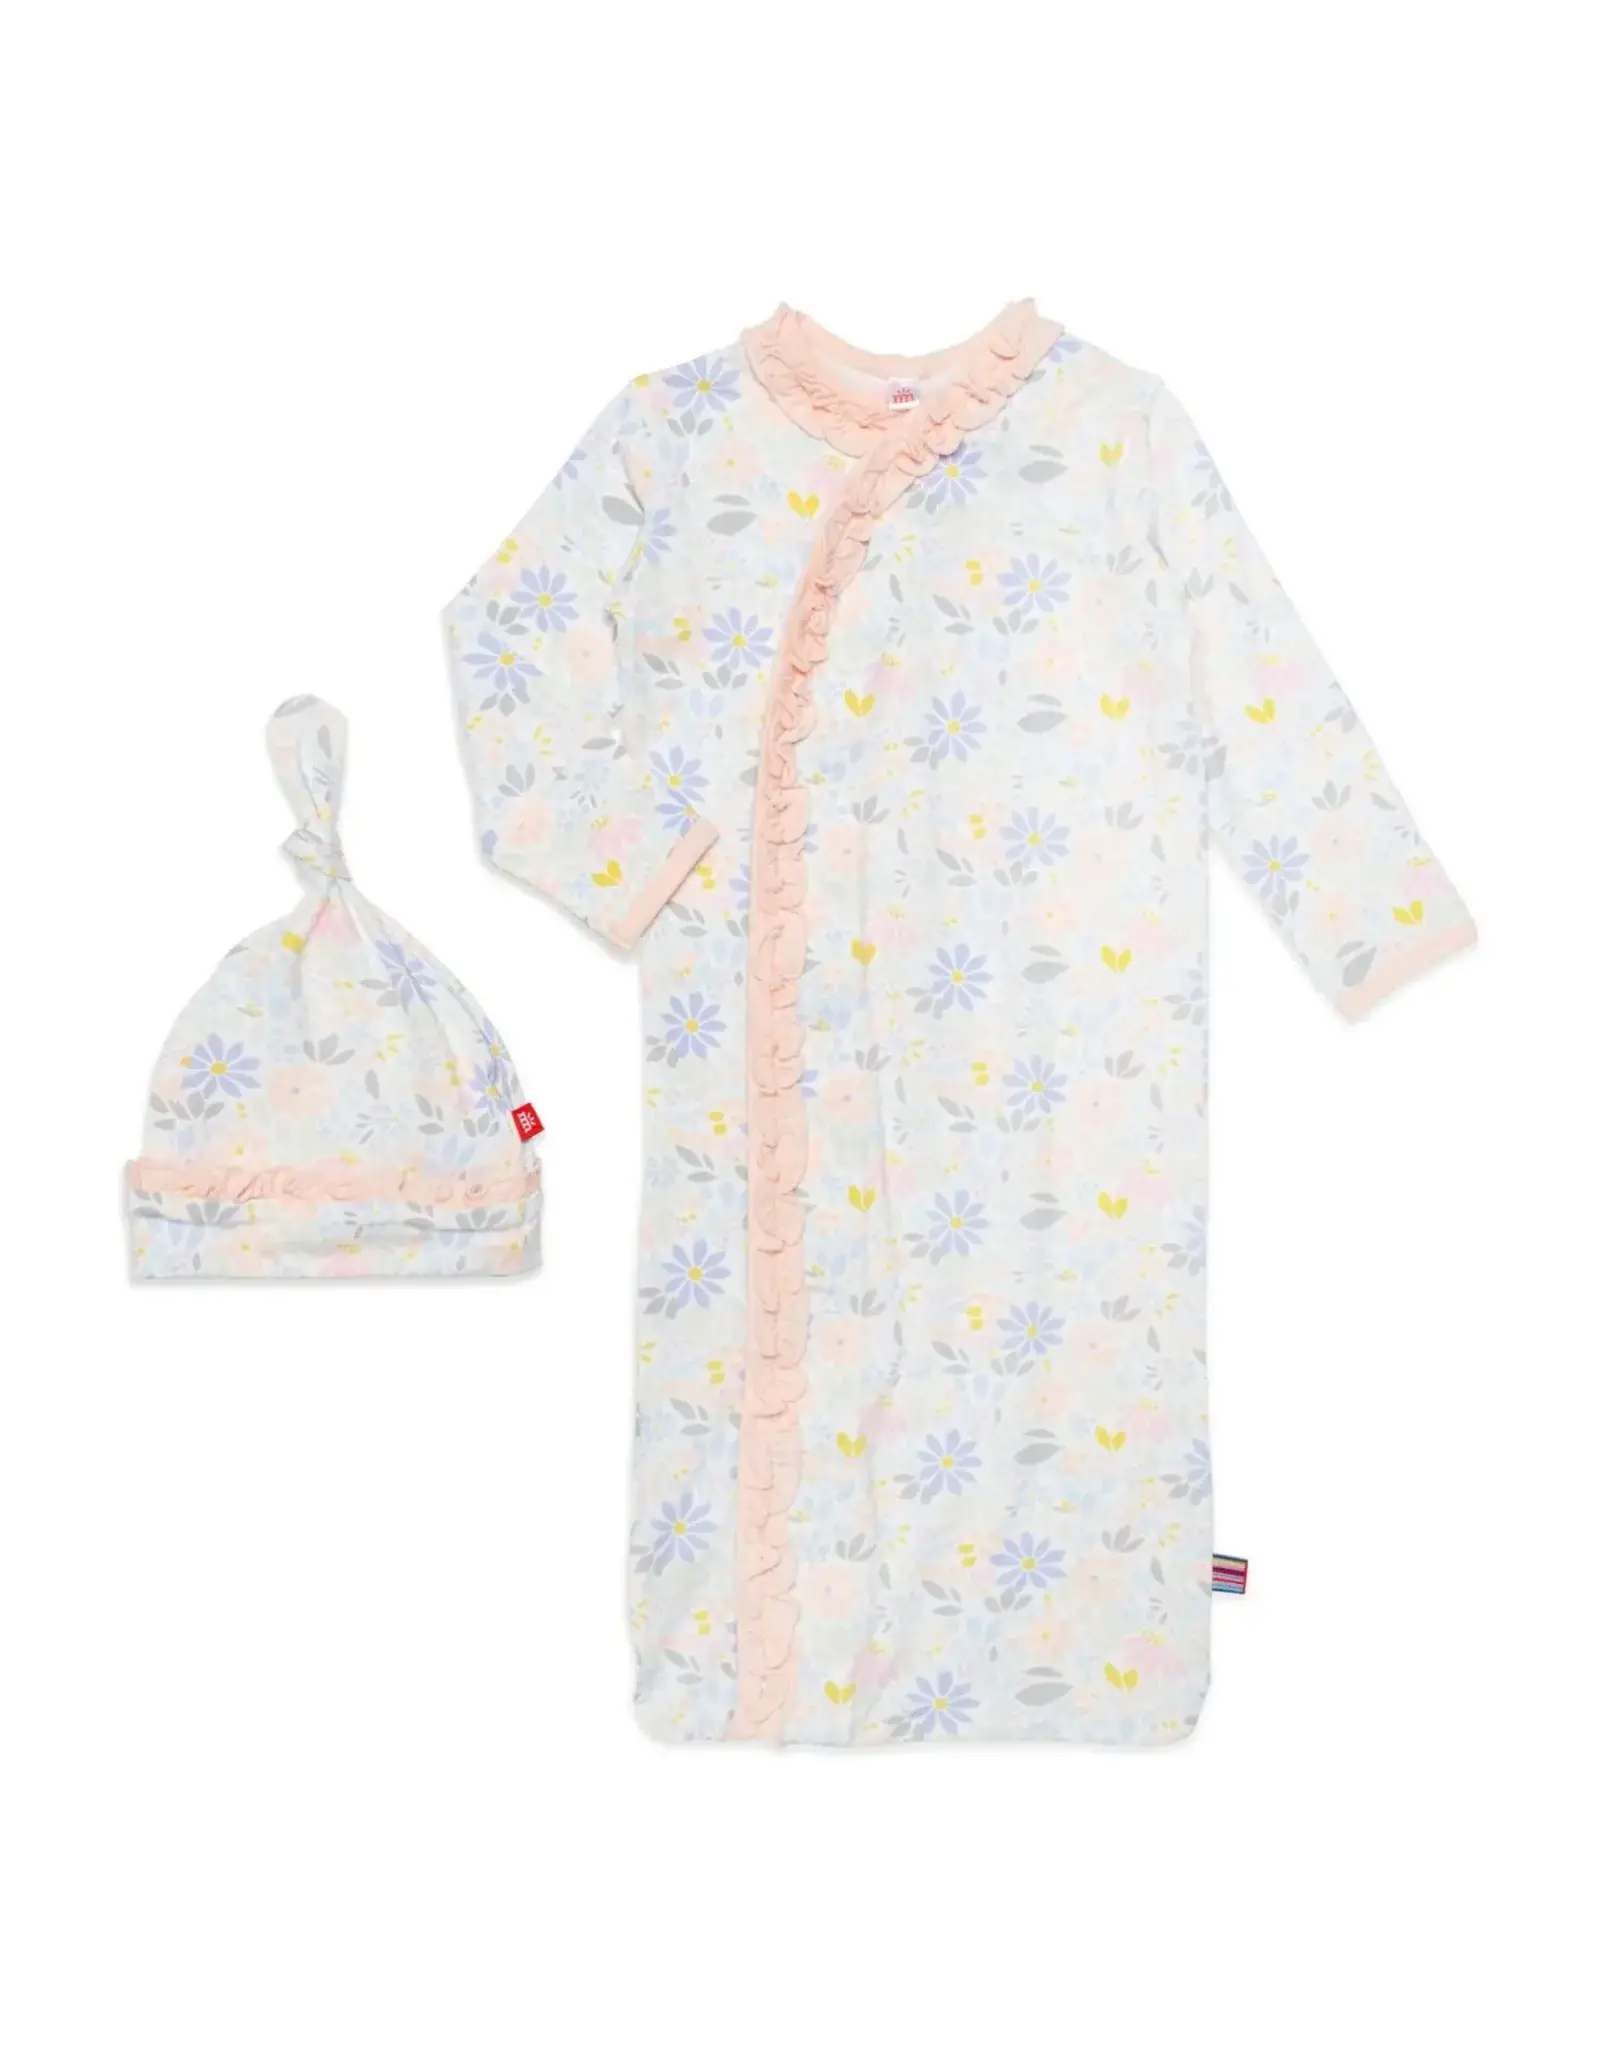 Magnetic Me Magnetic Me- Darby Modal Gown & Hat NB-3M Set